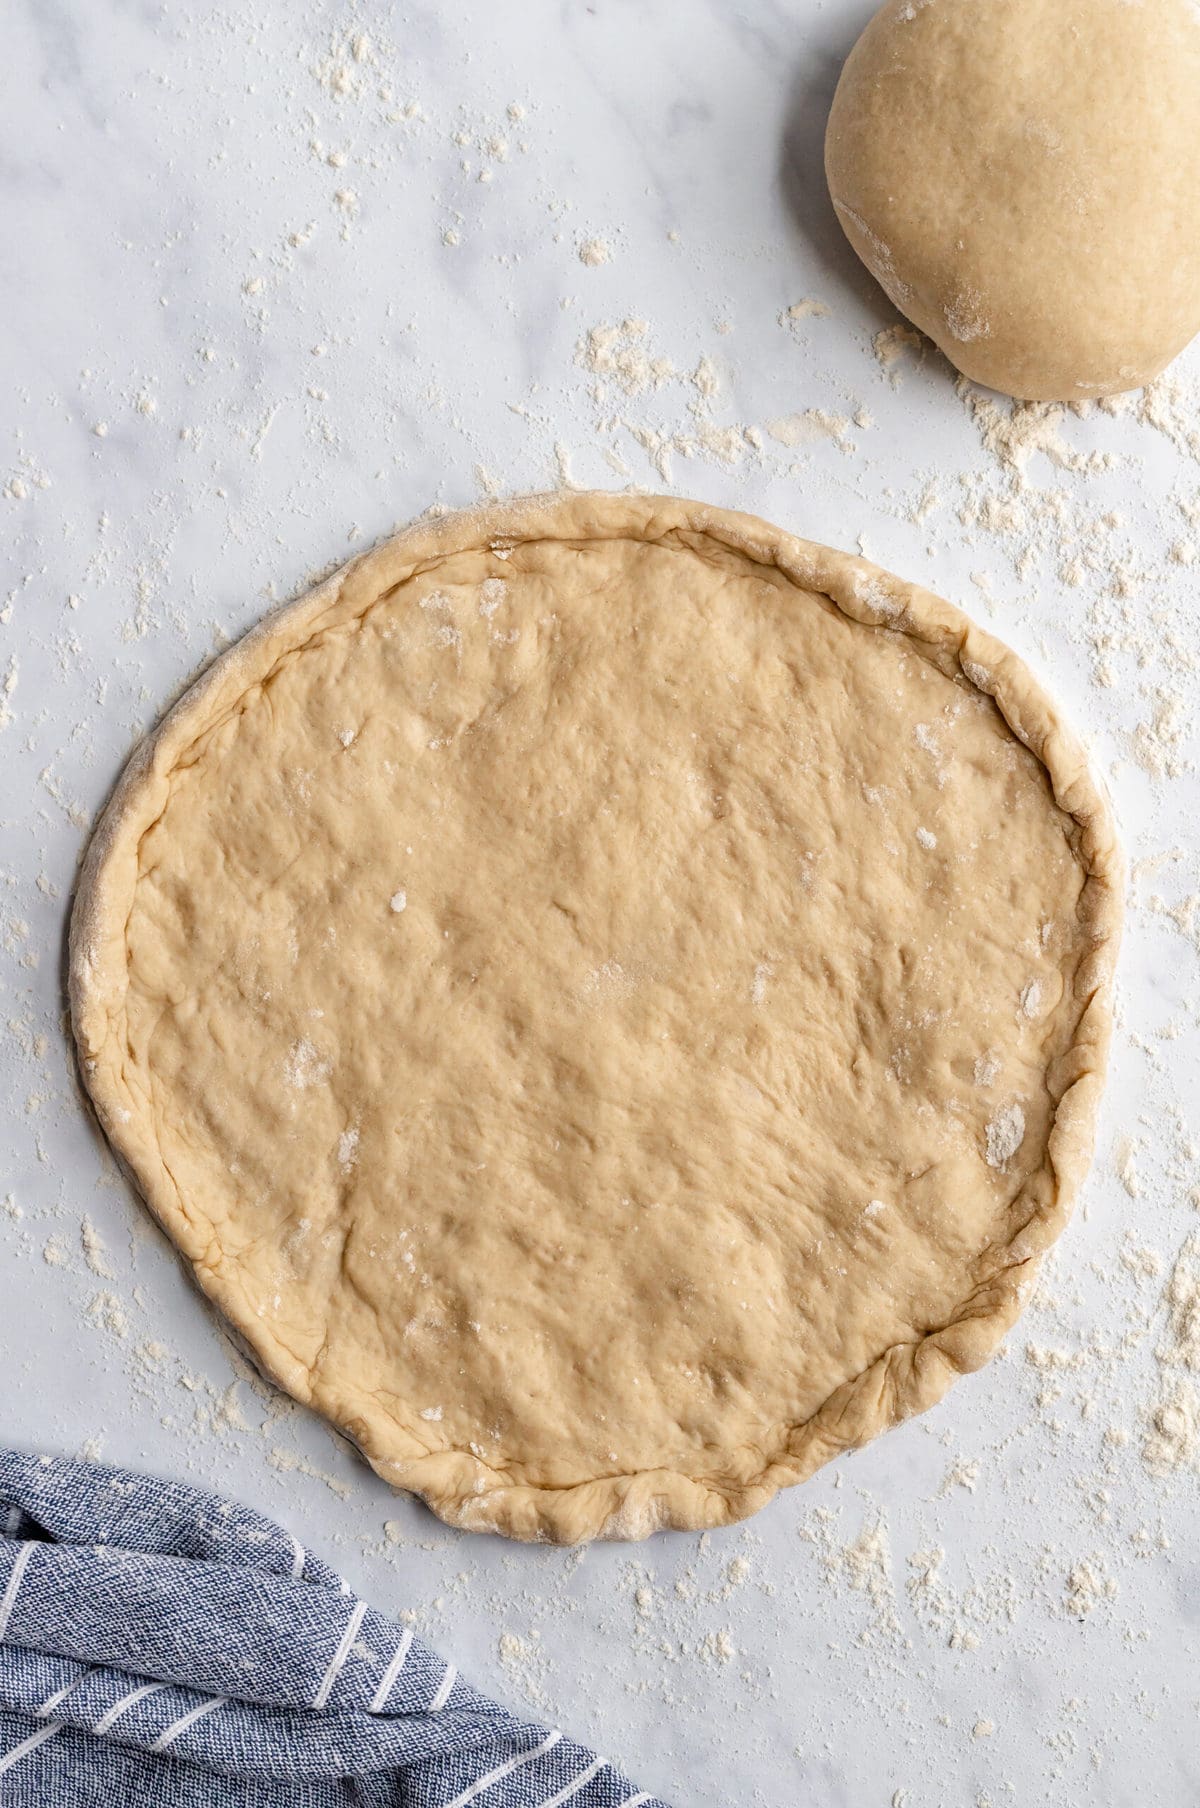 Rolled out pizza dough into a crust shape.